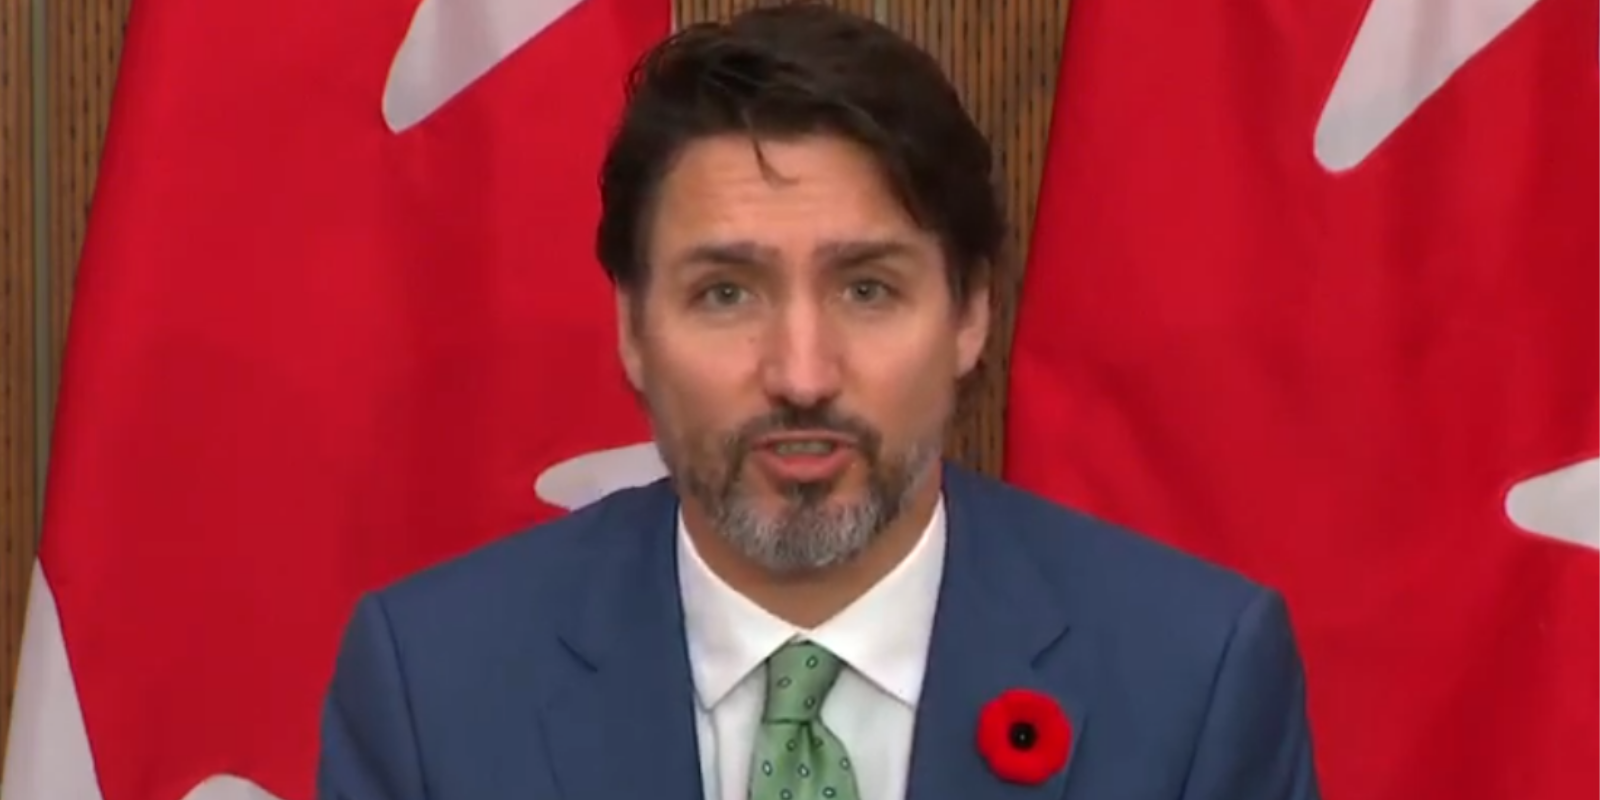 BREAKING: Trudeau says Whole Foods 'made a silly mistake' that he 'hopes' they 'will correct'